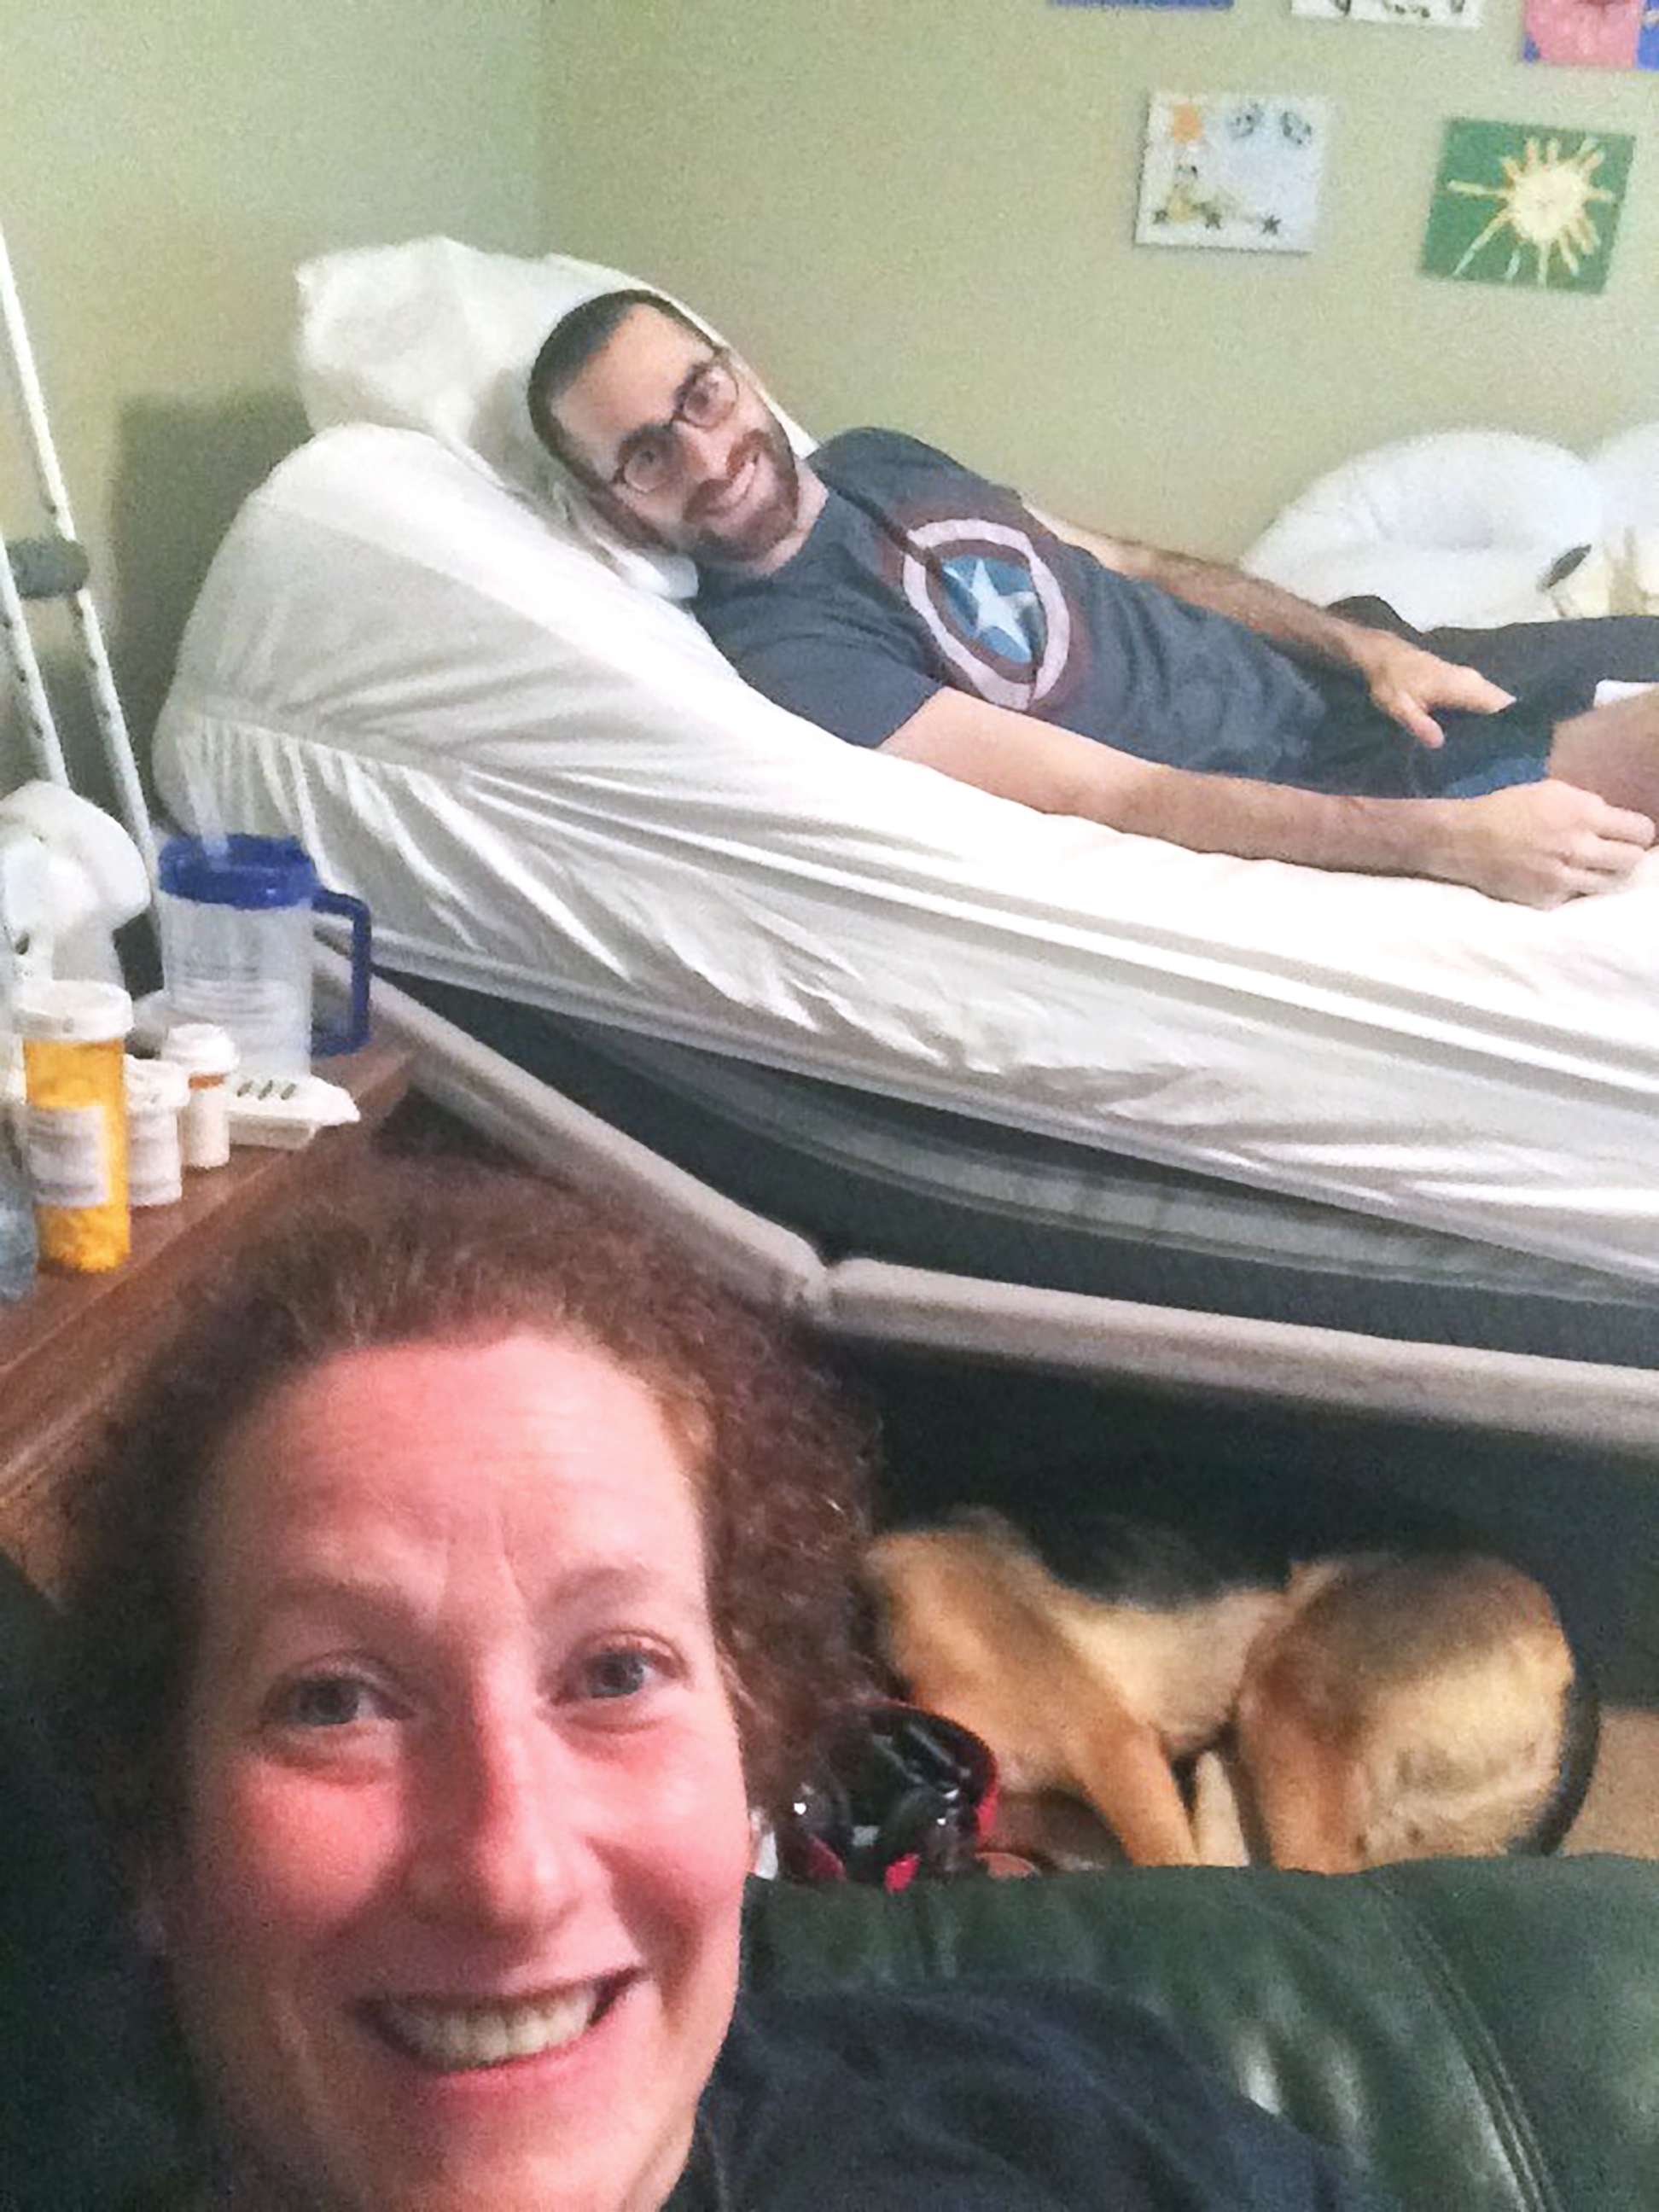 PHOTO:  Alane Levy of Atlanta, Georgia, came to care for Josh Libman and his family after seeing a post on Facebook about his fight with cancer this summer.